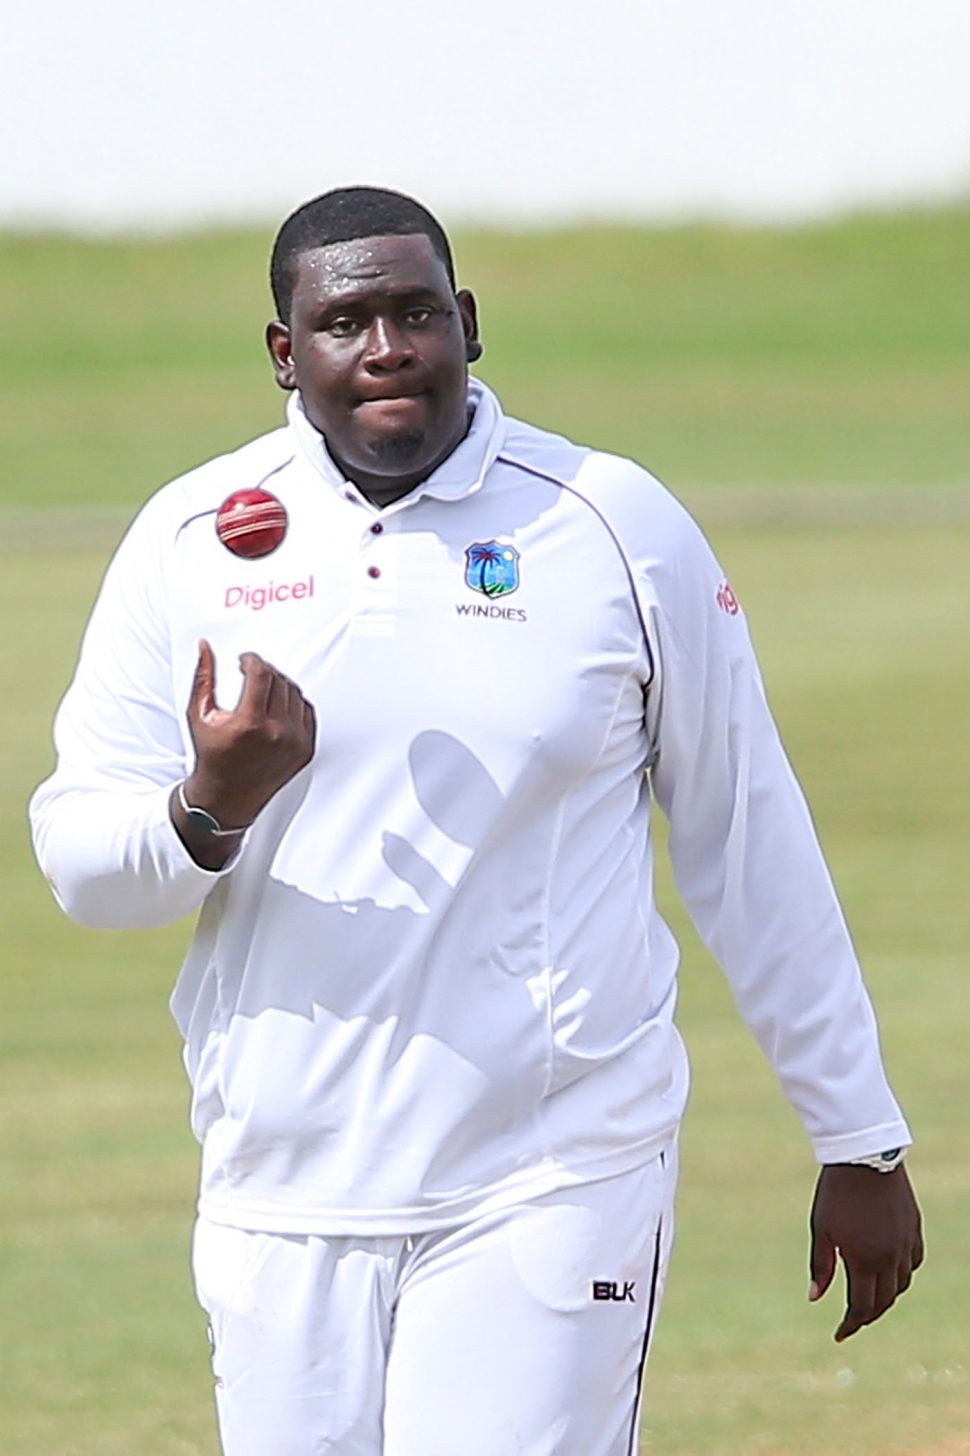 All eyes, as well as the cameras, will be on the burly Rahkeem Cornwall who will be making his debut today for the West Indies against traditional foes India.
